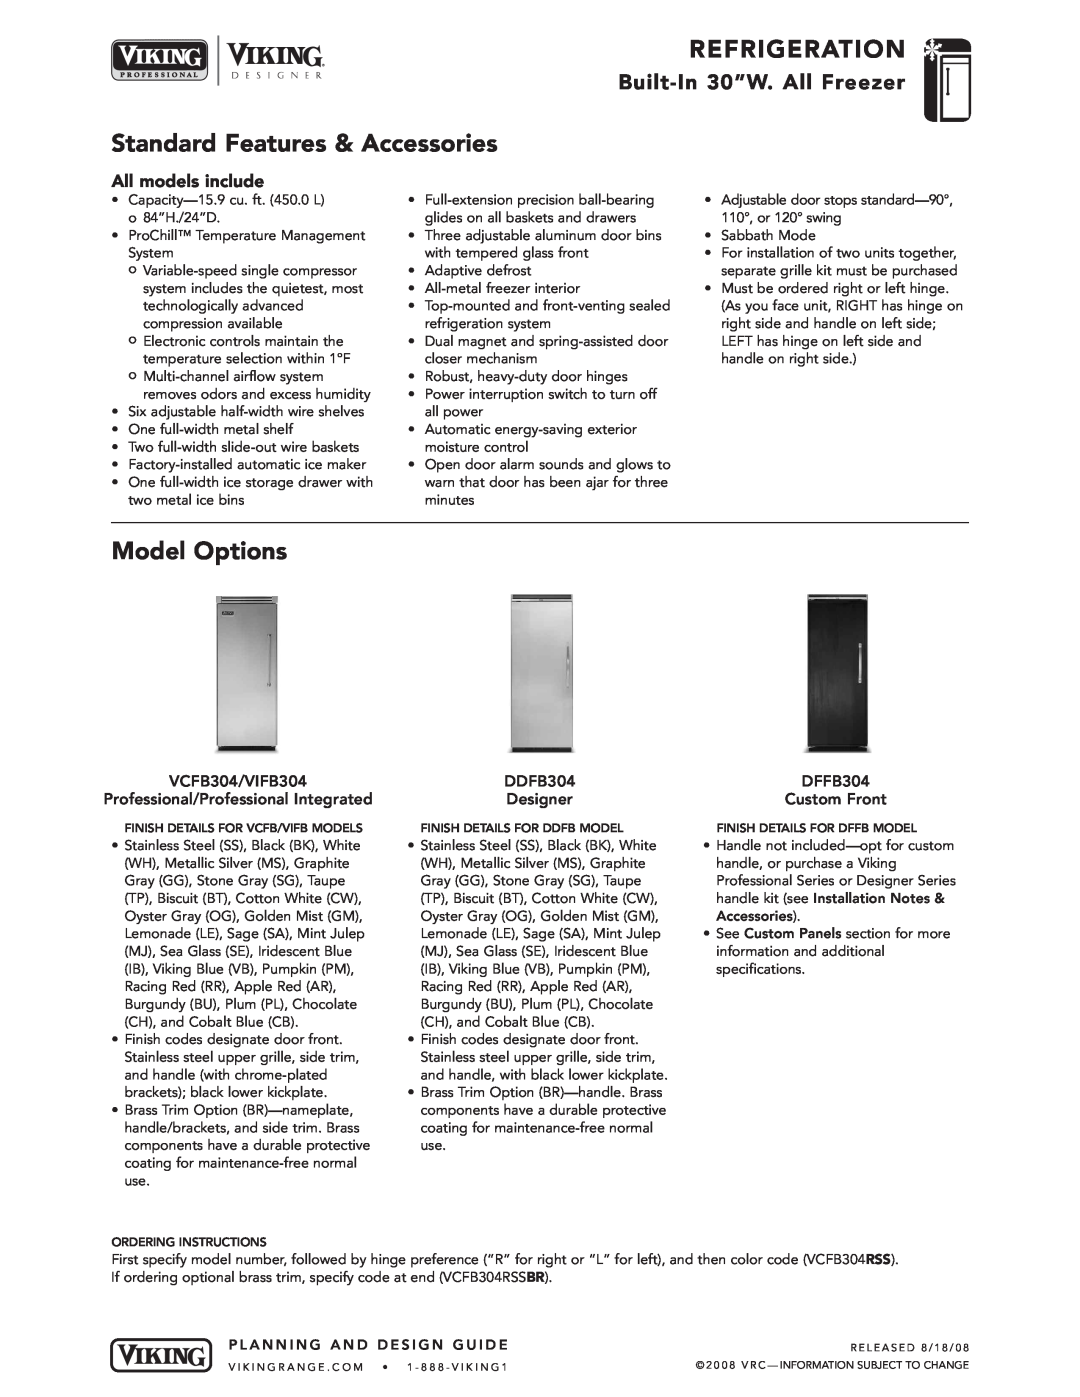 Viking VCFB304 specifications Refrig Eration, Standard Features & Accessories, Model Options, Built -In 30”W. All Freezer 